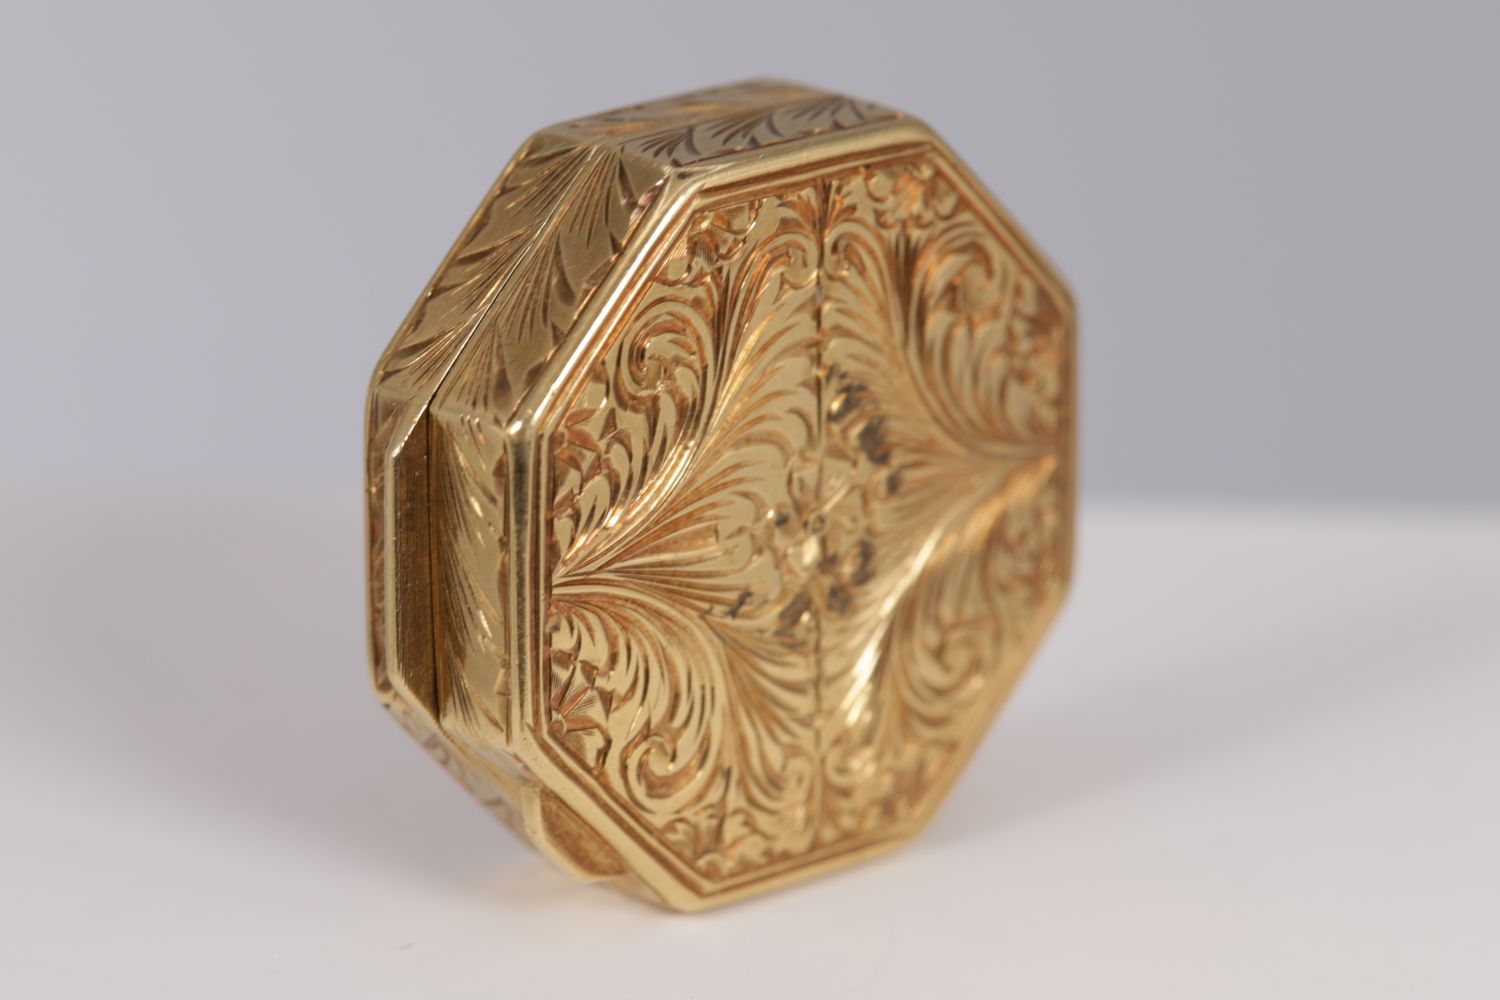 18K GOLD CHASED PILL BOX - Image 3 of 4